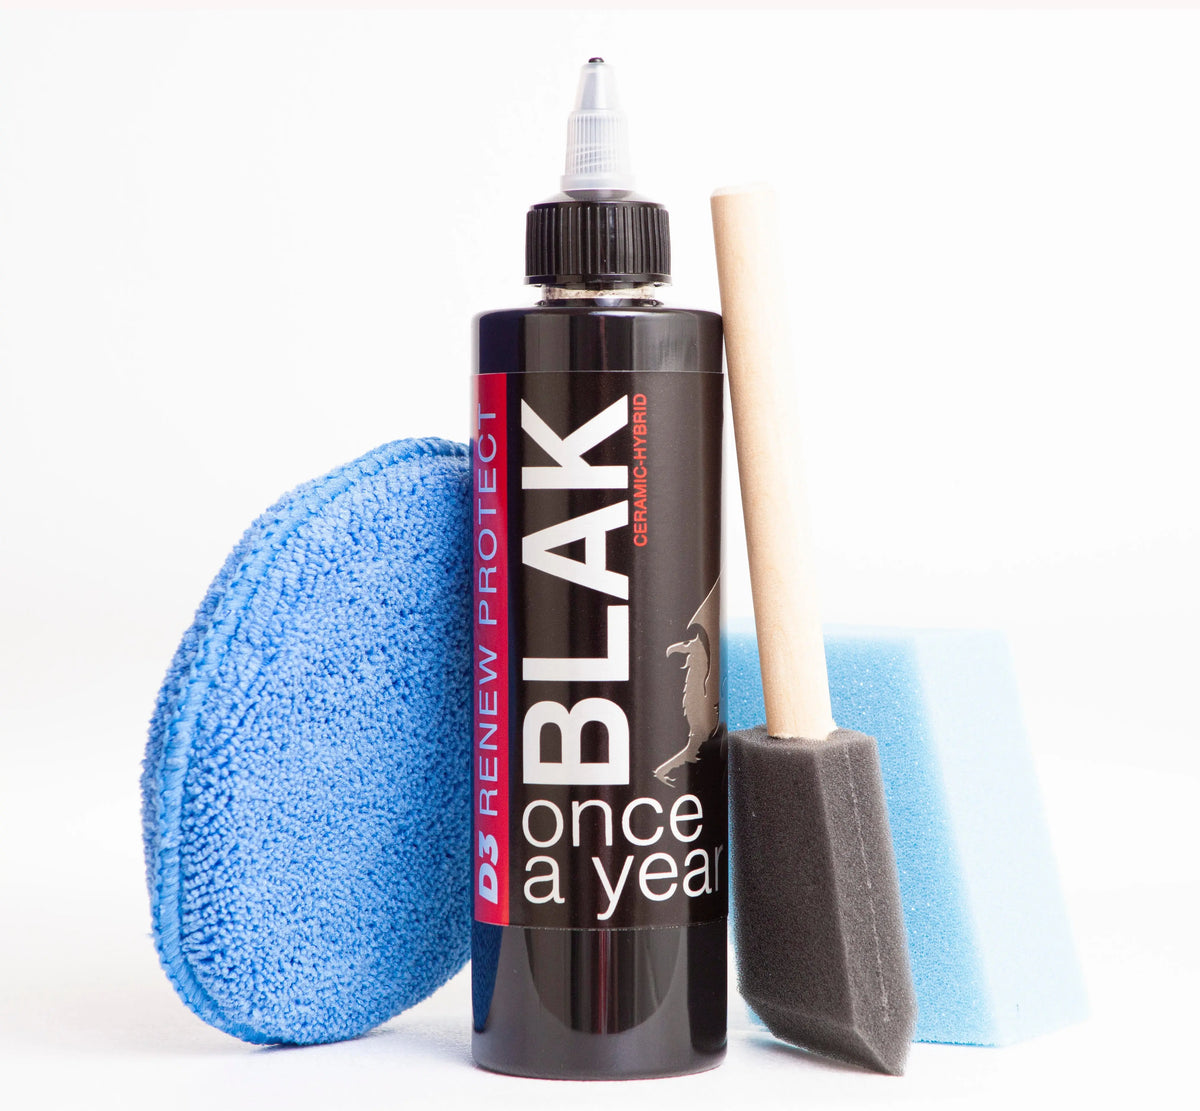 RENEW PROTECT - BLAK ONCE-A-YEAR 8 oz Ceramic-Infused Sealant and Protectant